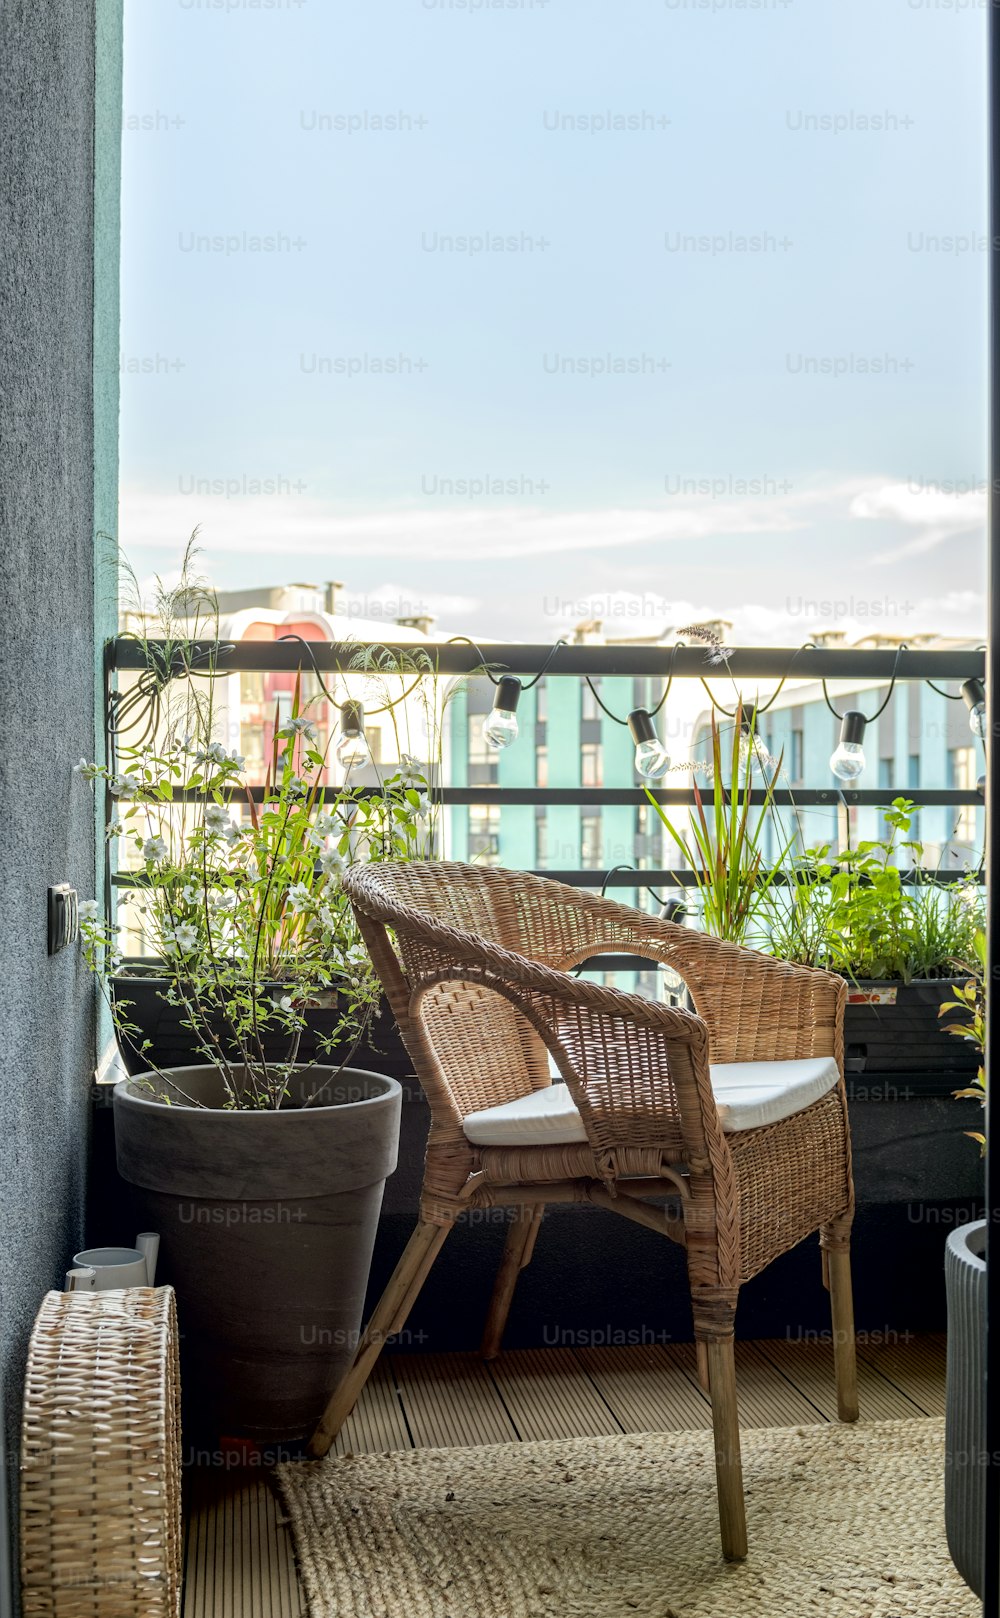 a wicker chair sitting on a balcony next to a potted plant